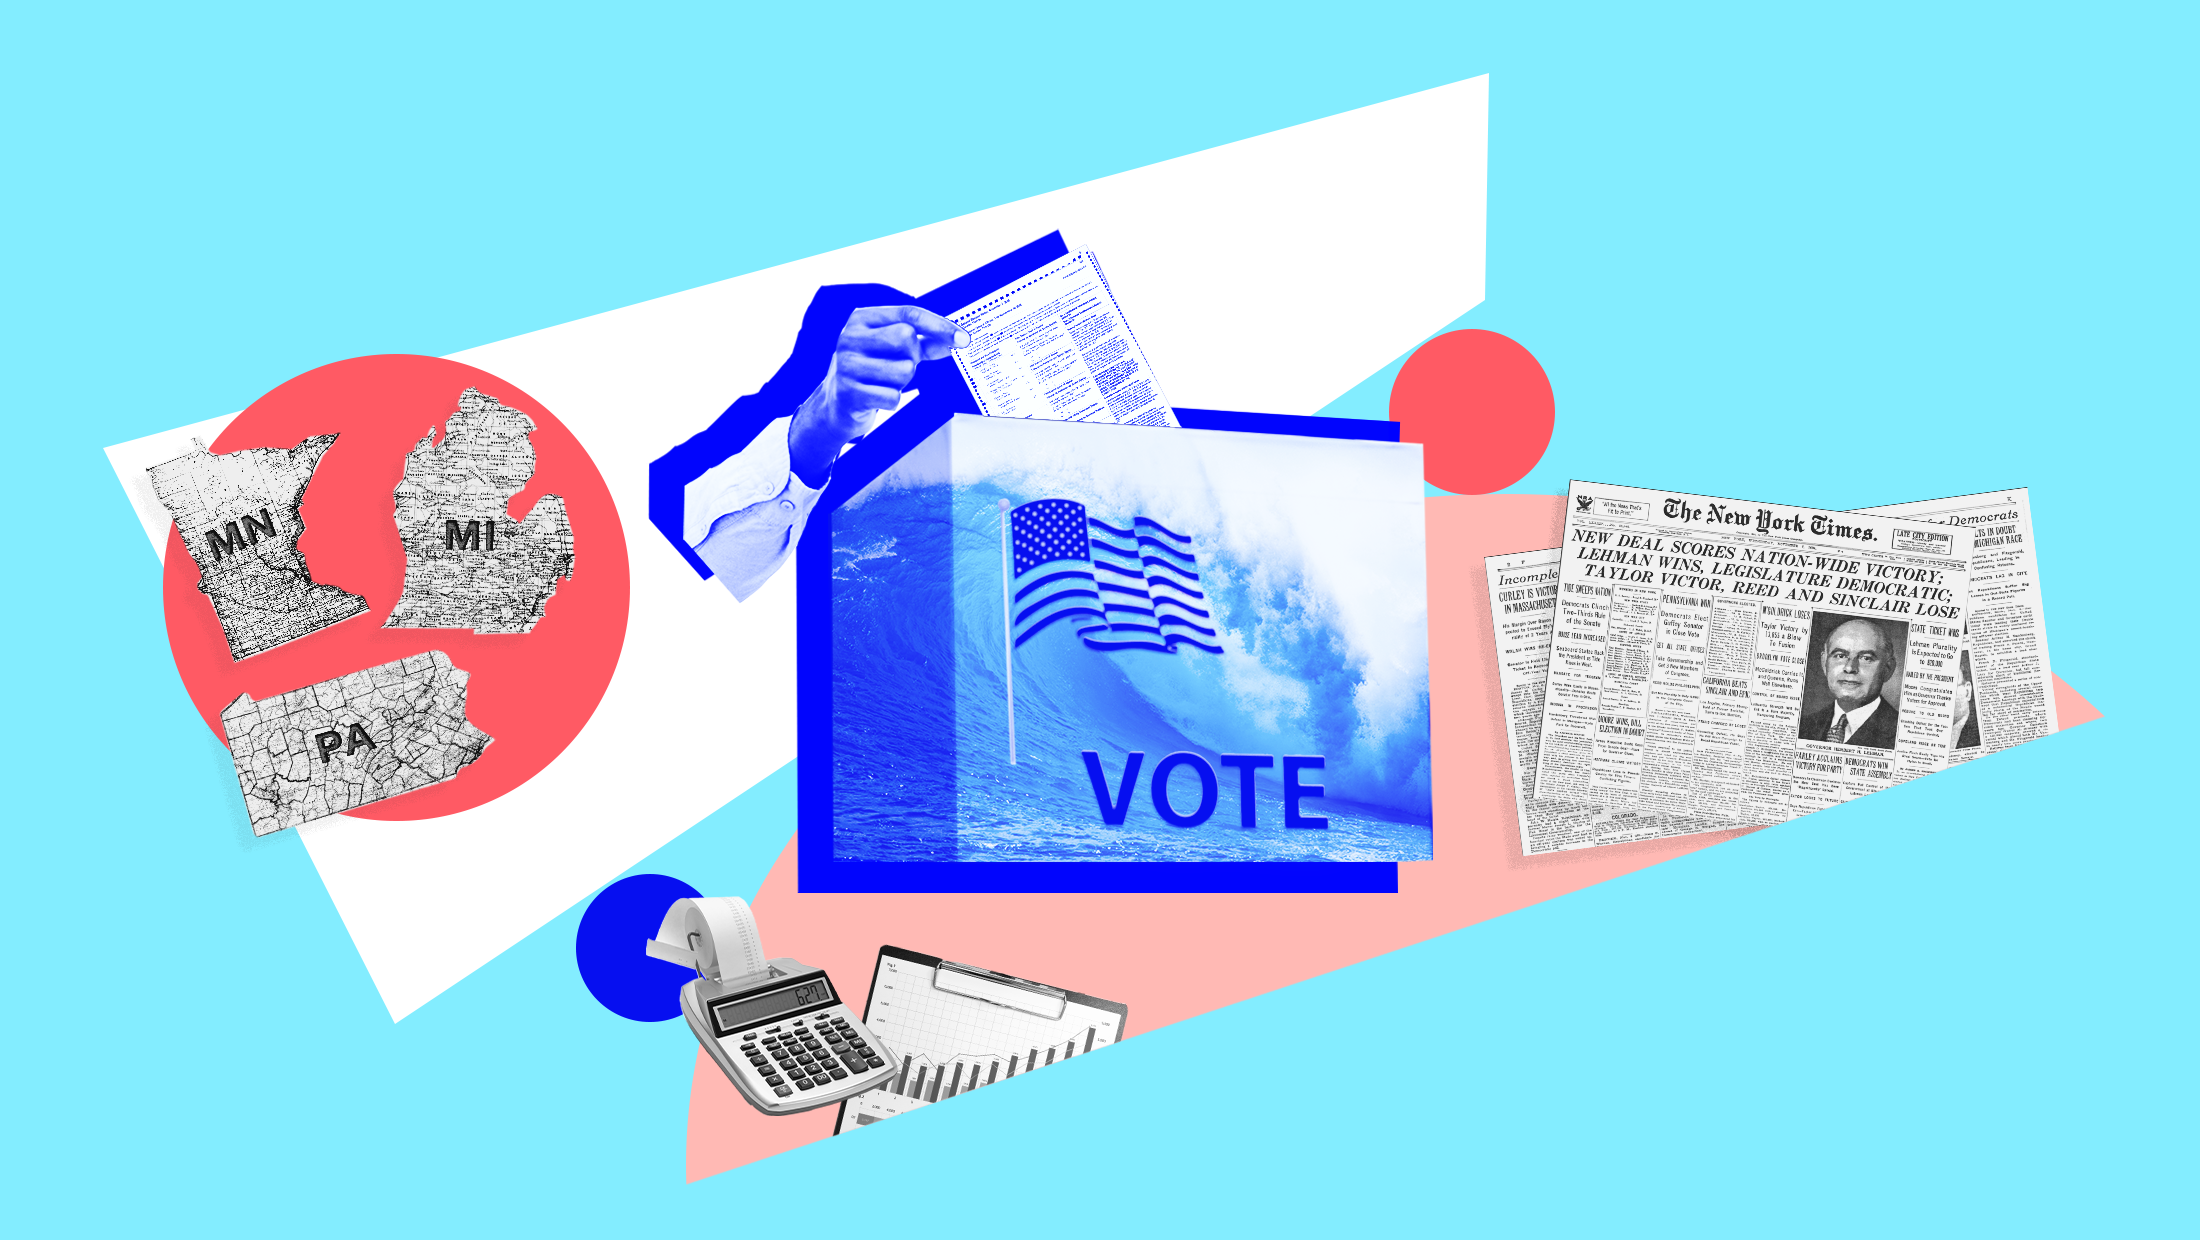 Light blue background with image of blue wave, an American flag and the word "VOTE" laid over a ballot box and someone inserting their ballot into the box, black and white images of the Minnesota, Michigan and Pennsylvania state maps, a black and white image of a calculator and bar graphs and New York Times front pages from 1934.